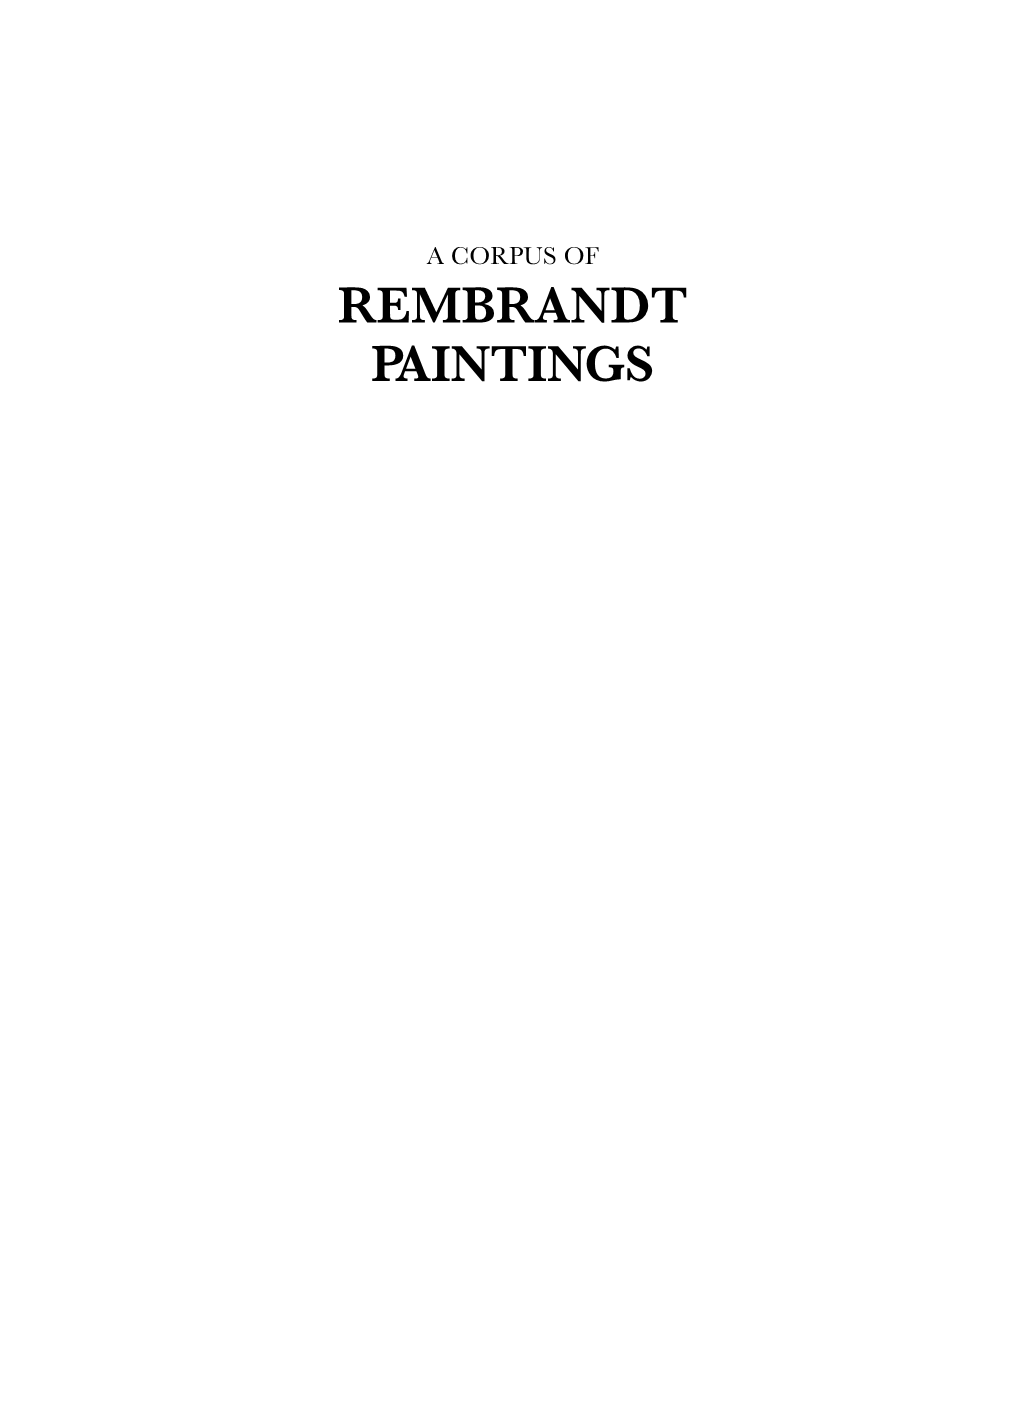 REMBRANDT PAINTINGS Stichting Foundation Rembrandt Research Project